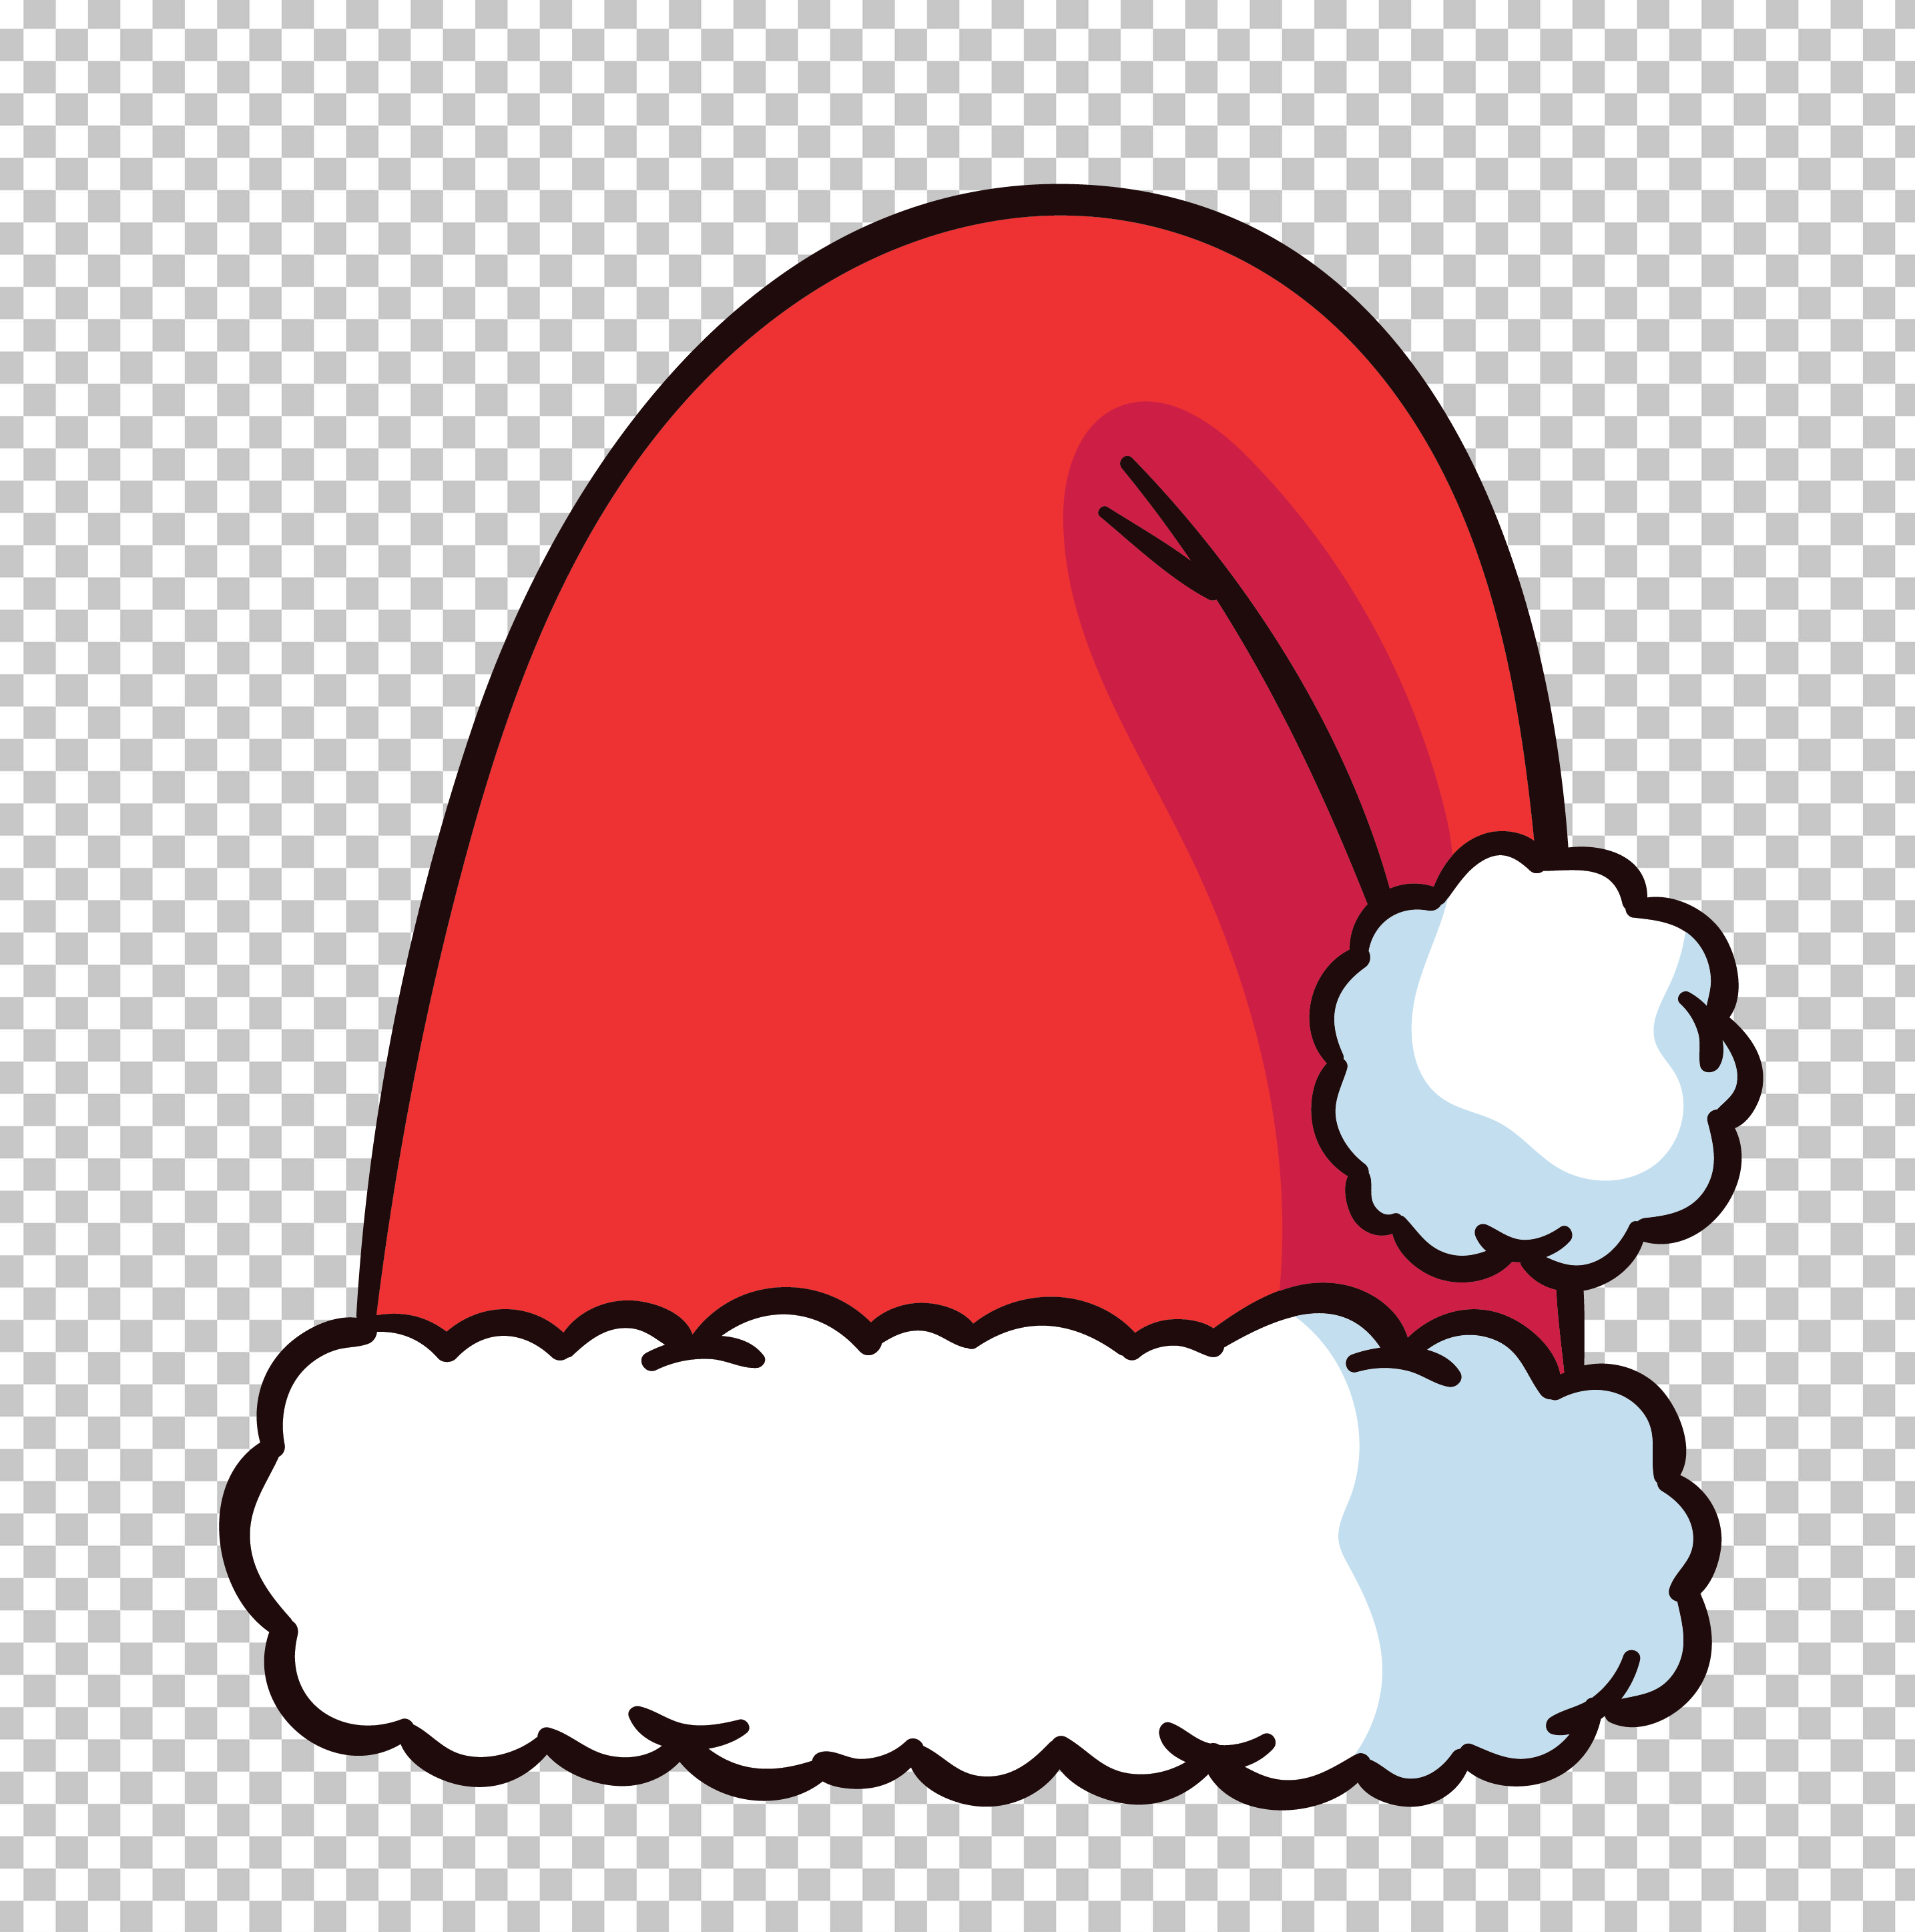 Red Santa Hat with White Pom Pom PNG Image